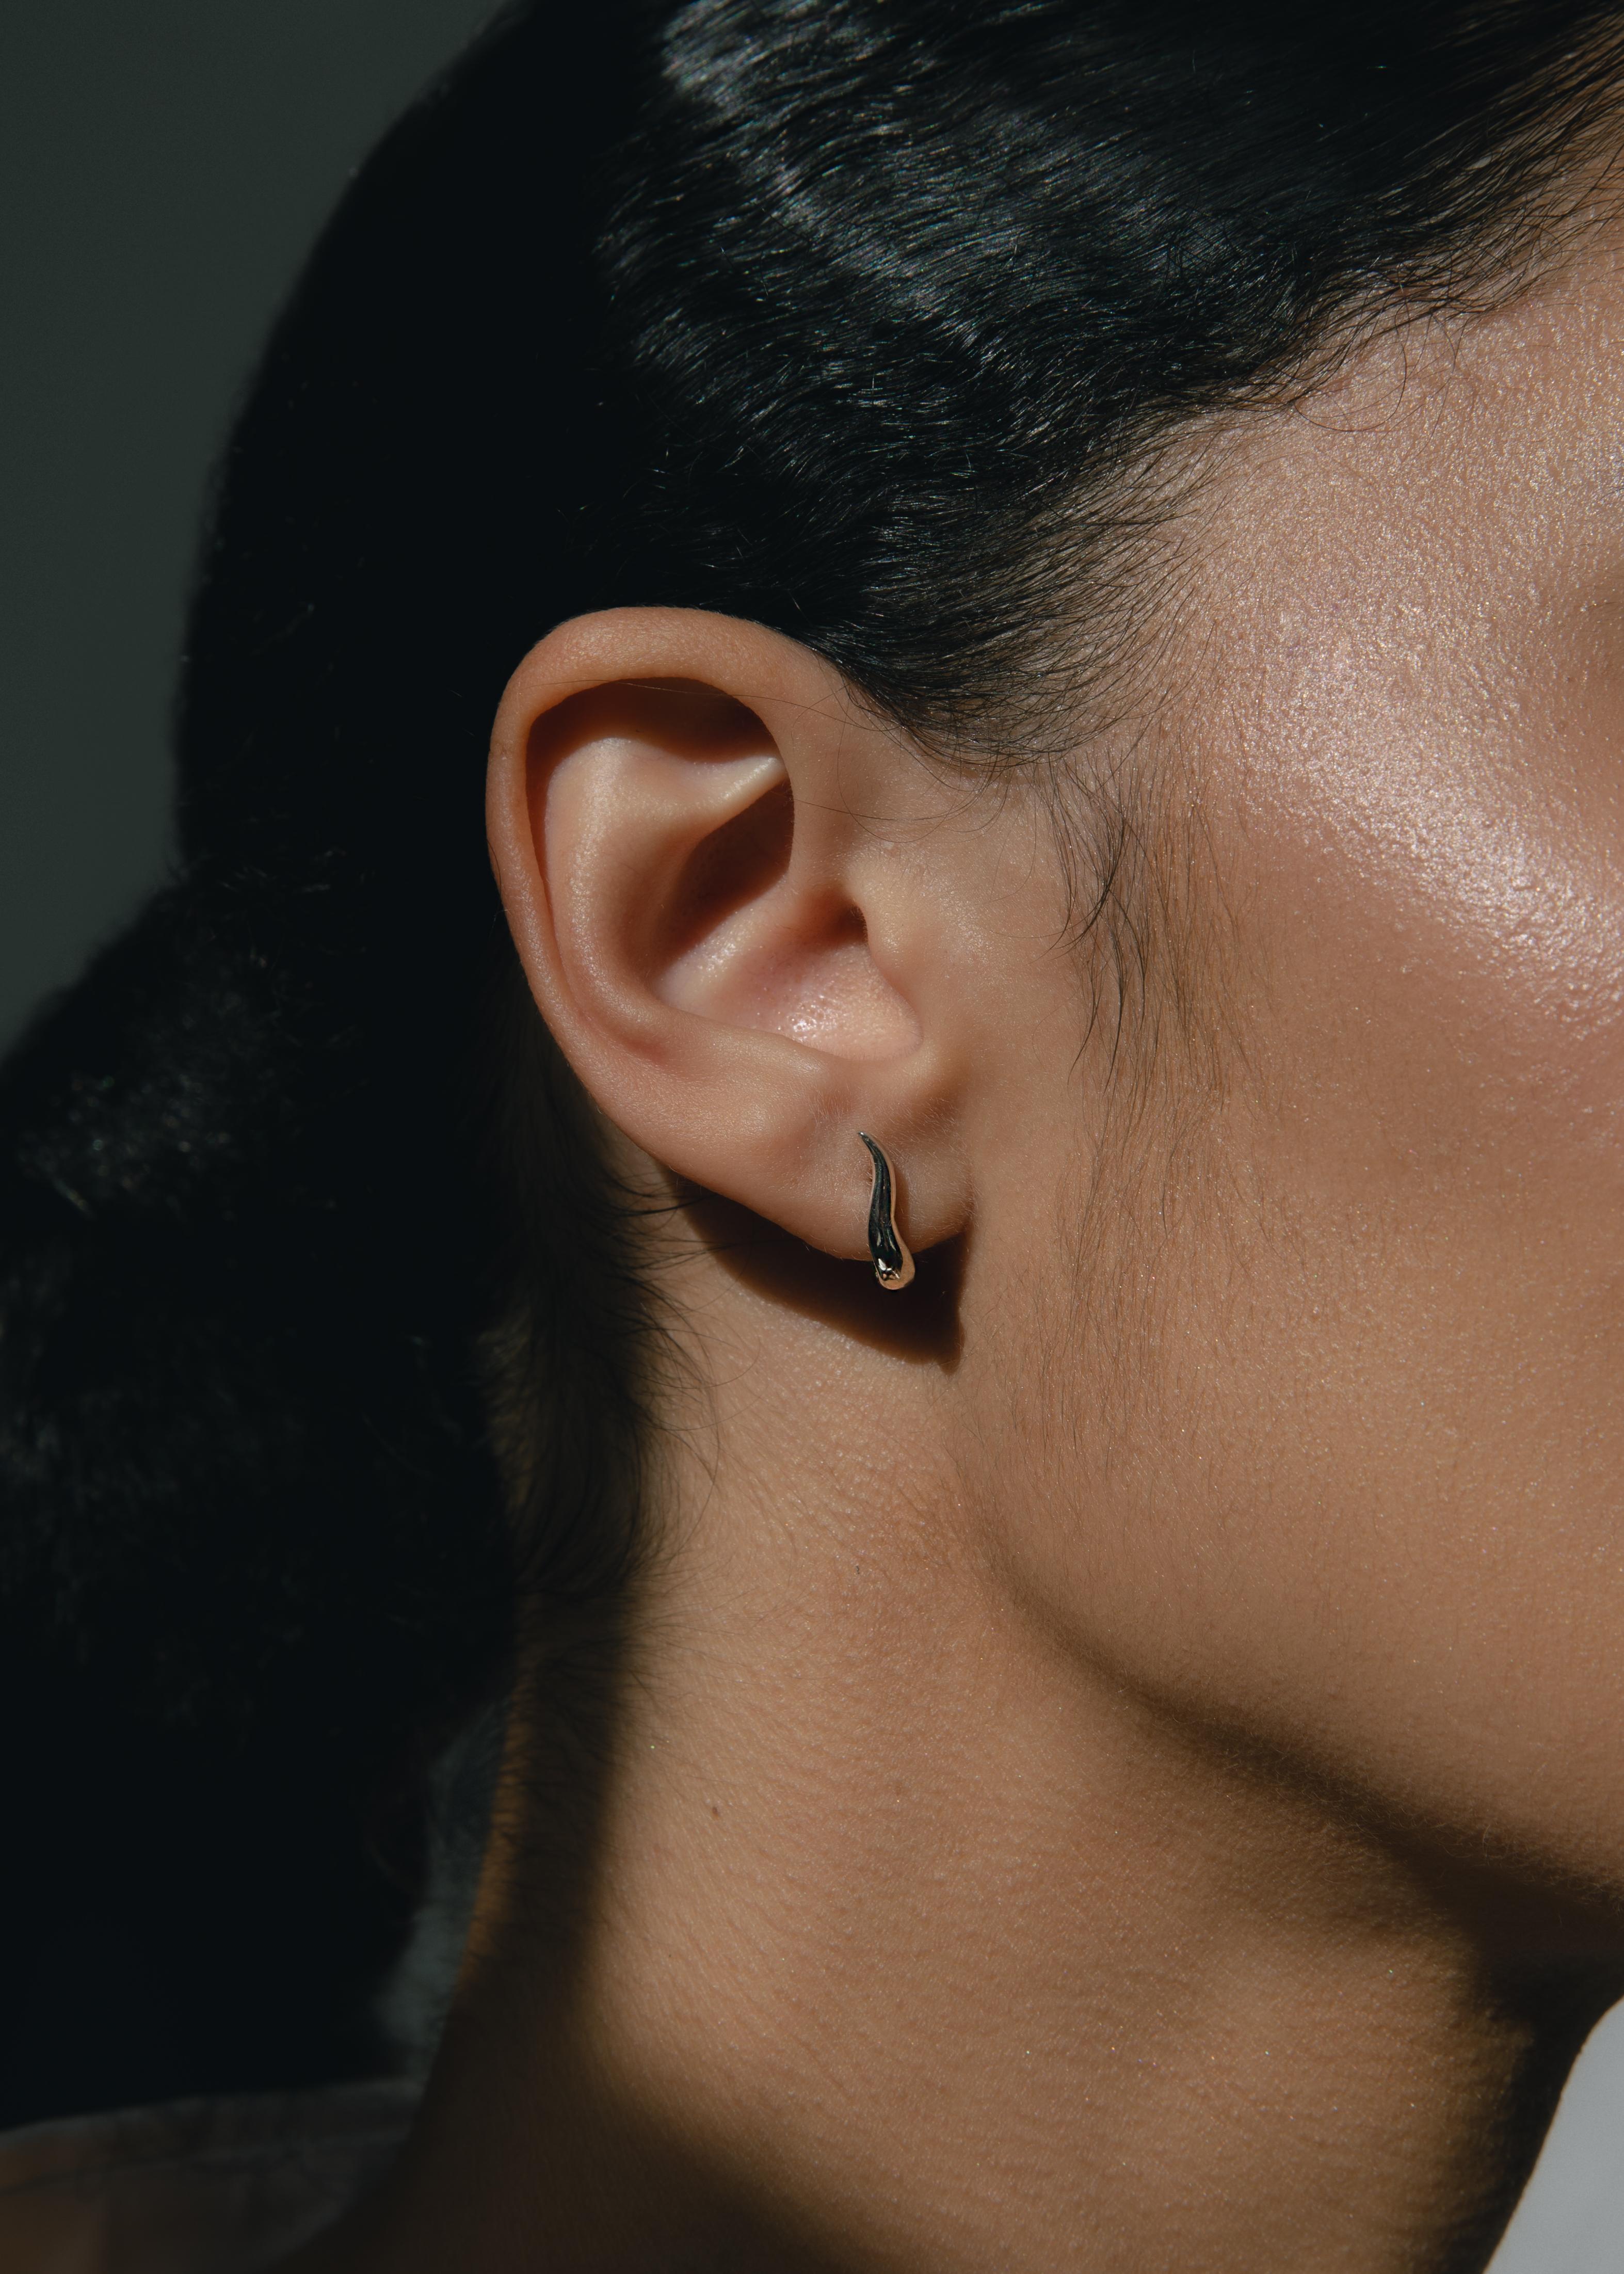 Organically shaped delicate hoops designed to sit closely to your ear.

-14k yellow gold
-post and pushback closure
-sold as a pair

Each Ruth Nyc piece is handmade to order in our NYC studios. Each piece is designed to become a personal talisman, a